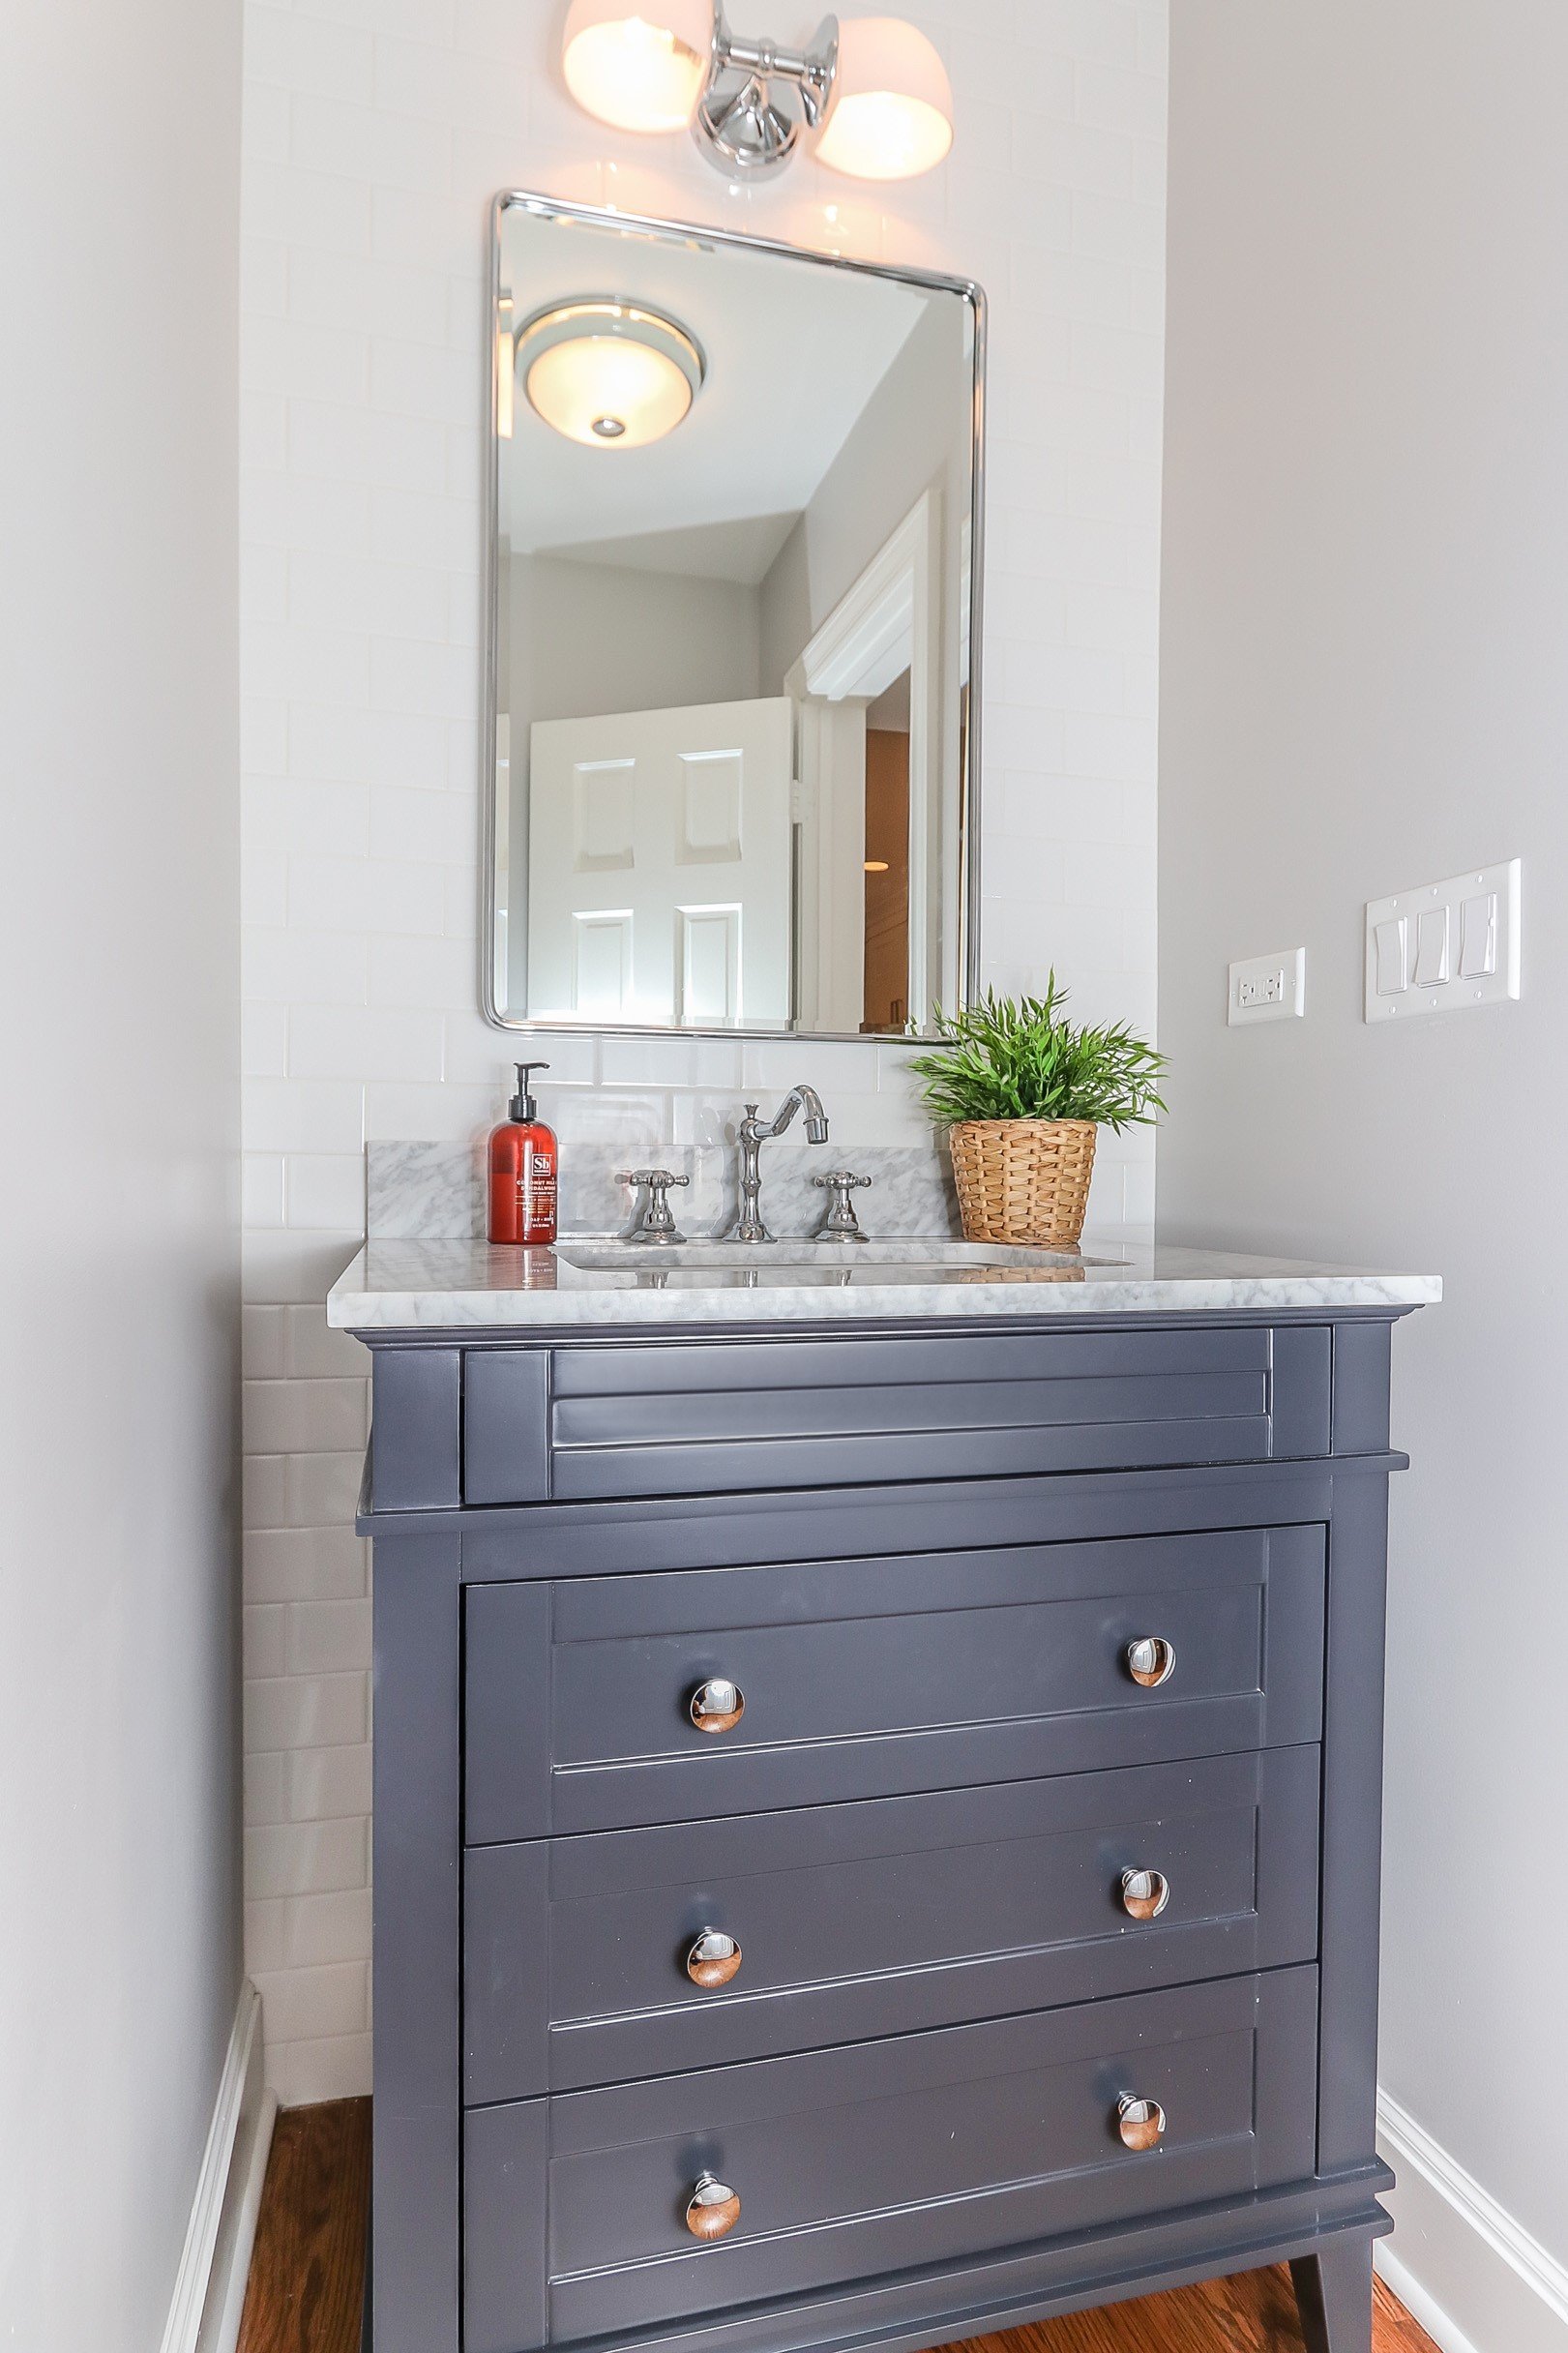 Steps to Remodeling Your Bathroom in Arlington Heights